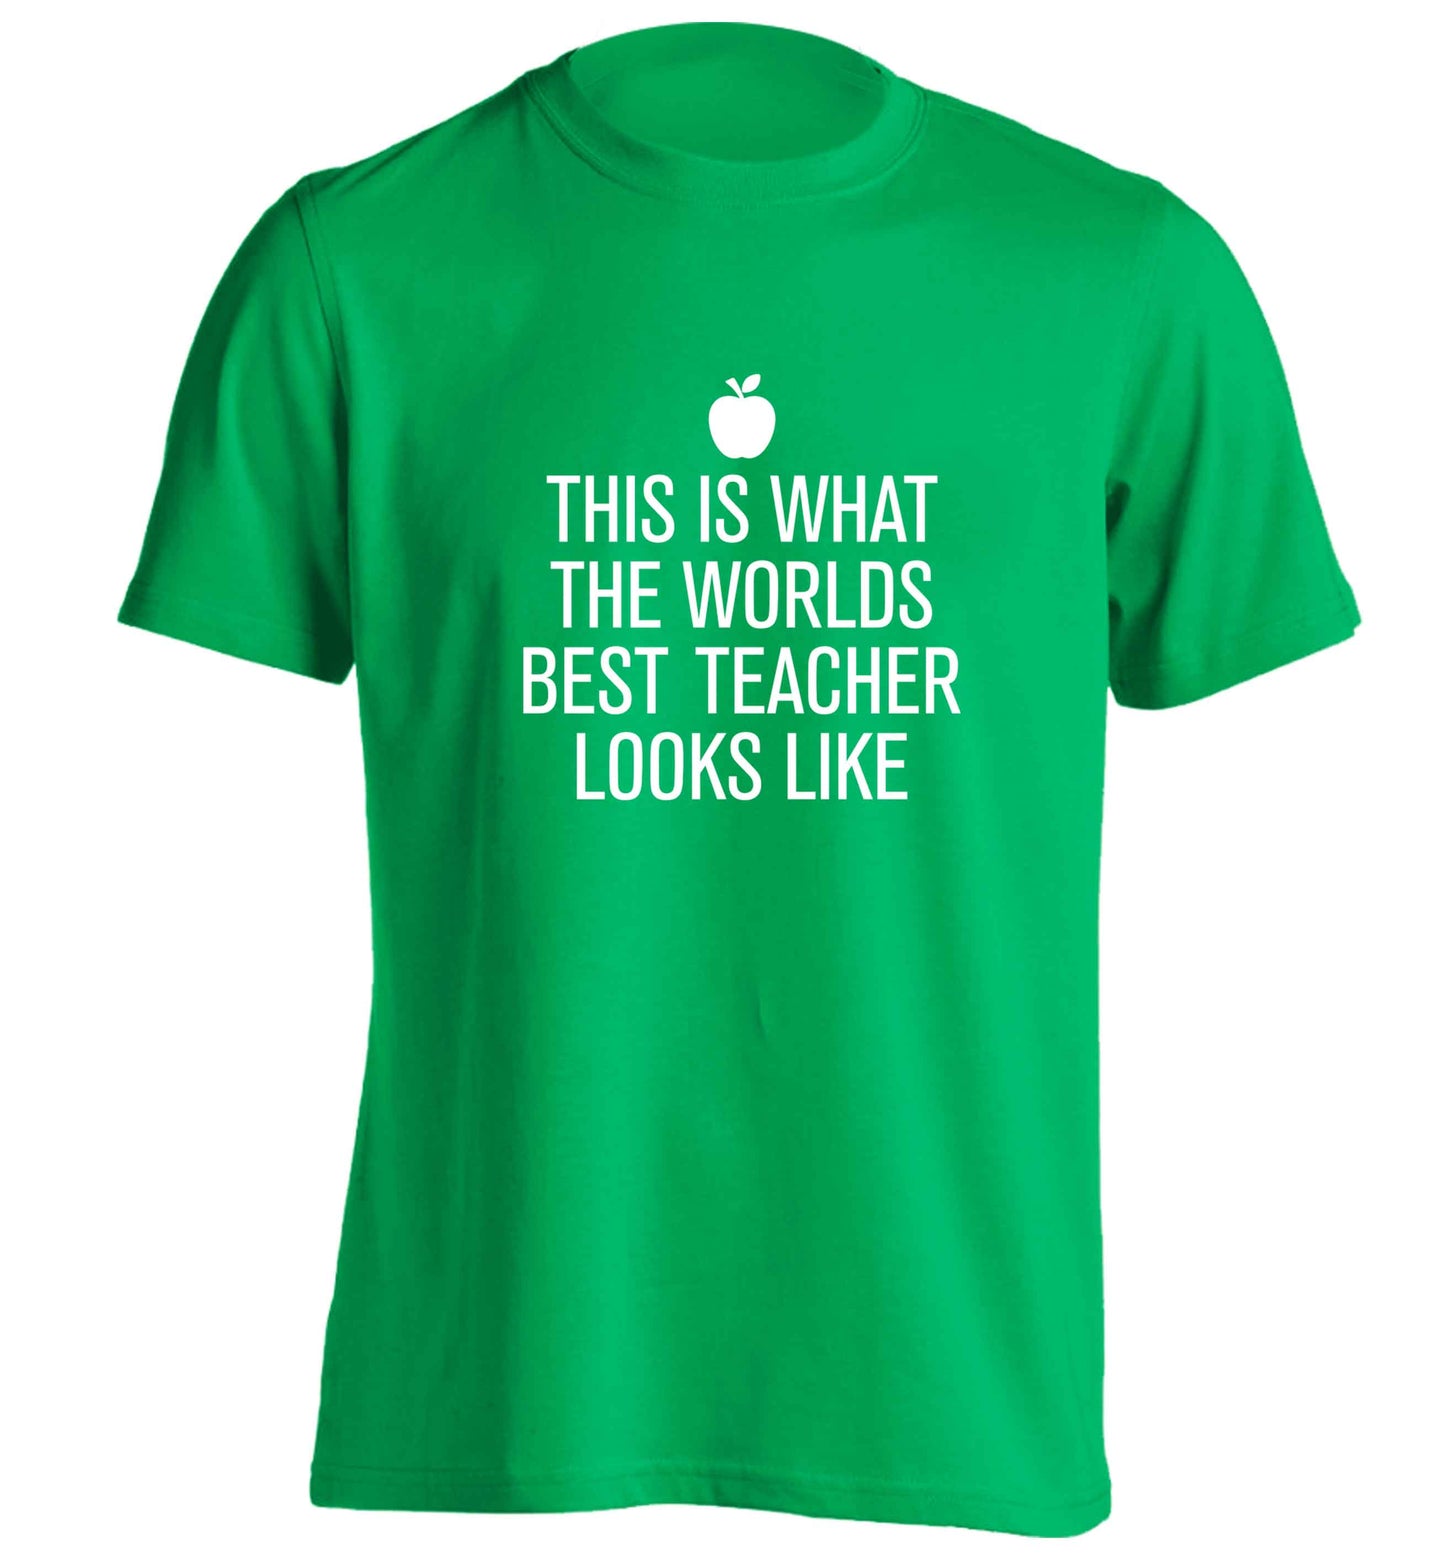 This is what the worlds best teacher looks like adults unisex green Tshirt 2XL